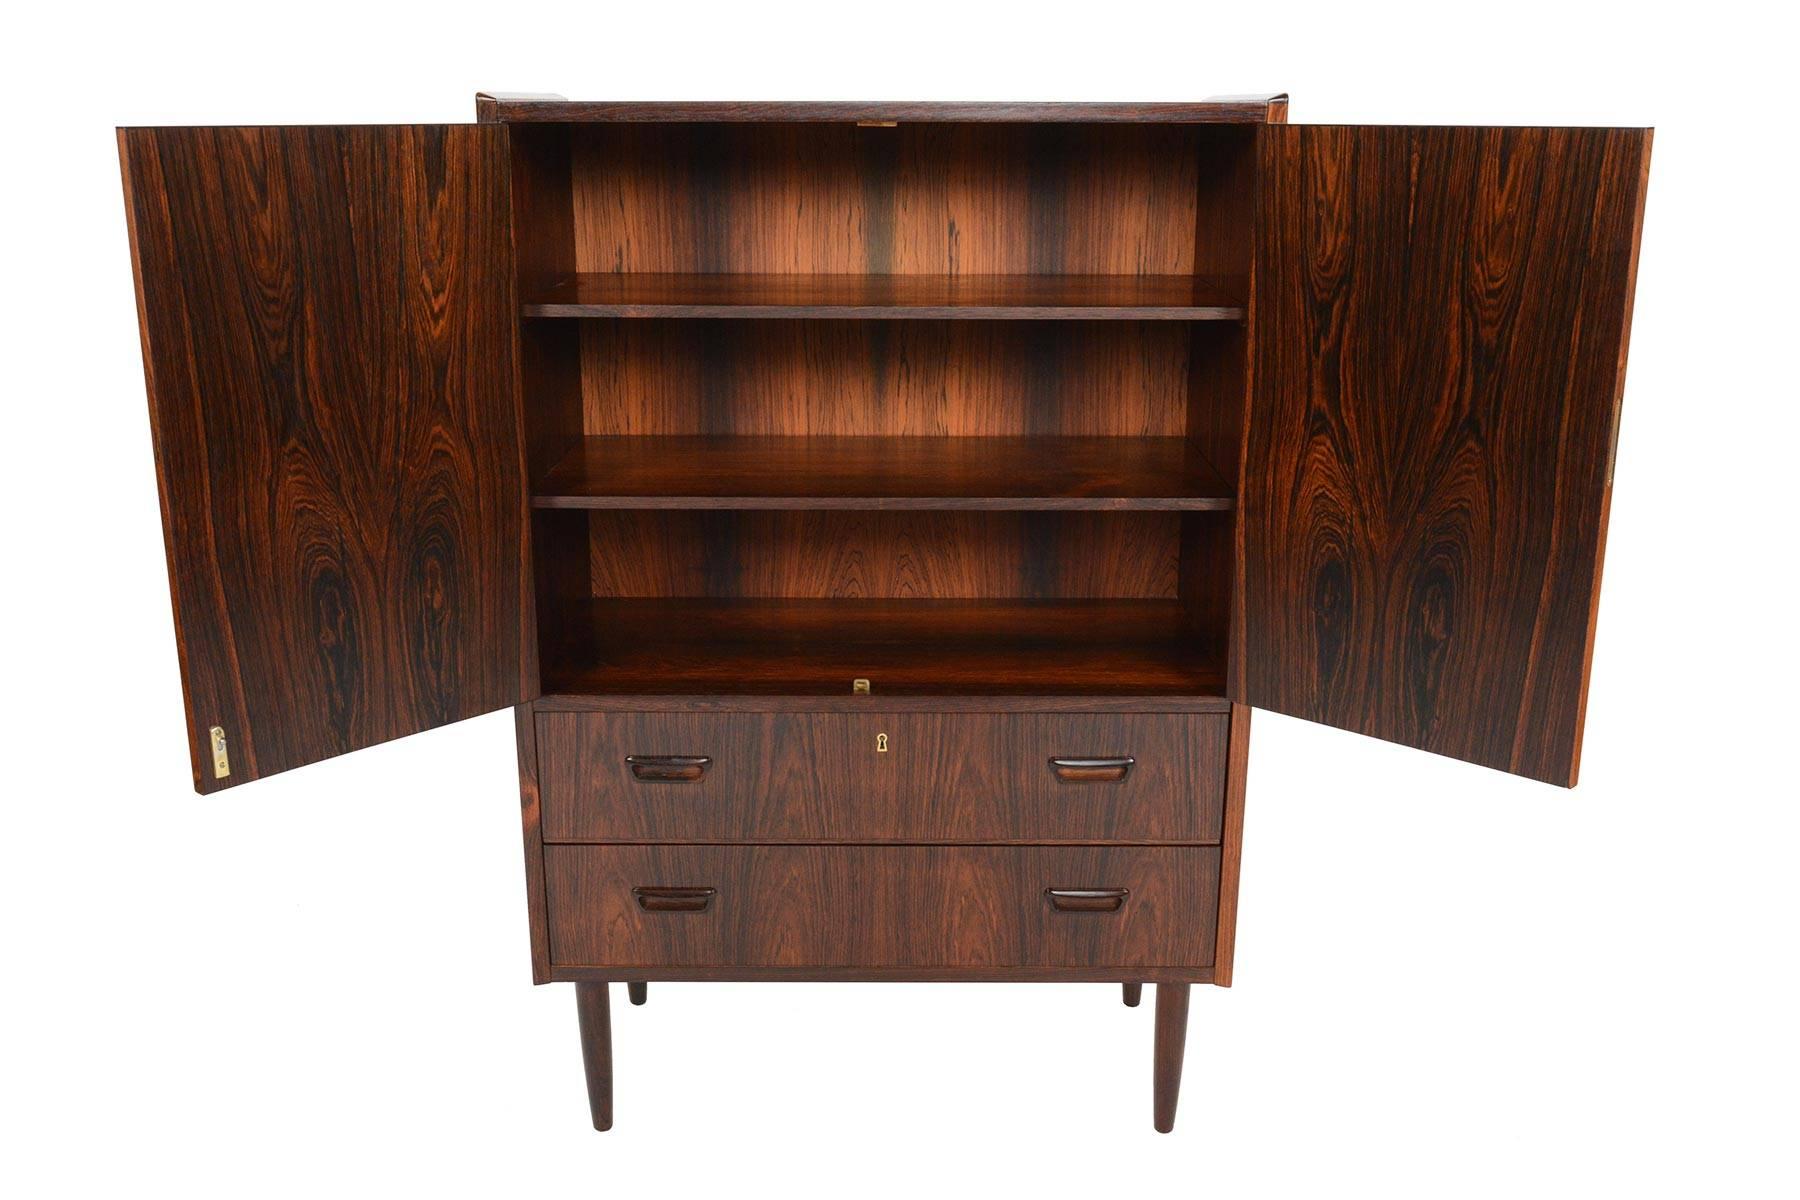 This stunning Danish modern bureau in Brazilian rosewood offers exceptional storage for any room! Perfect for use as a dresser, bookcase, or bar! Two large locking doors open to reveal a spacious interior with adjustable shelving. Two lower drawers